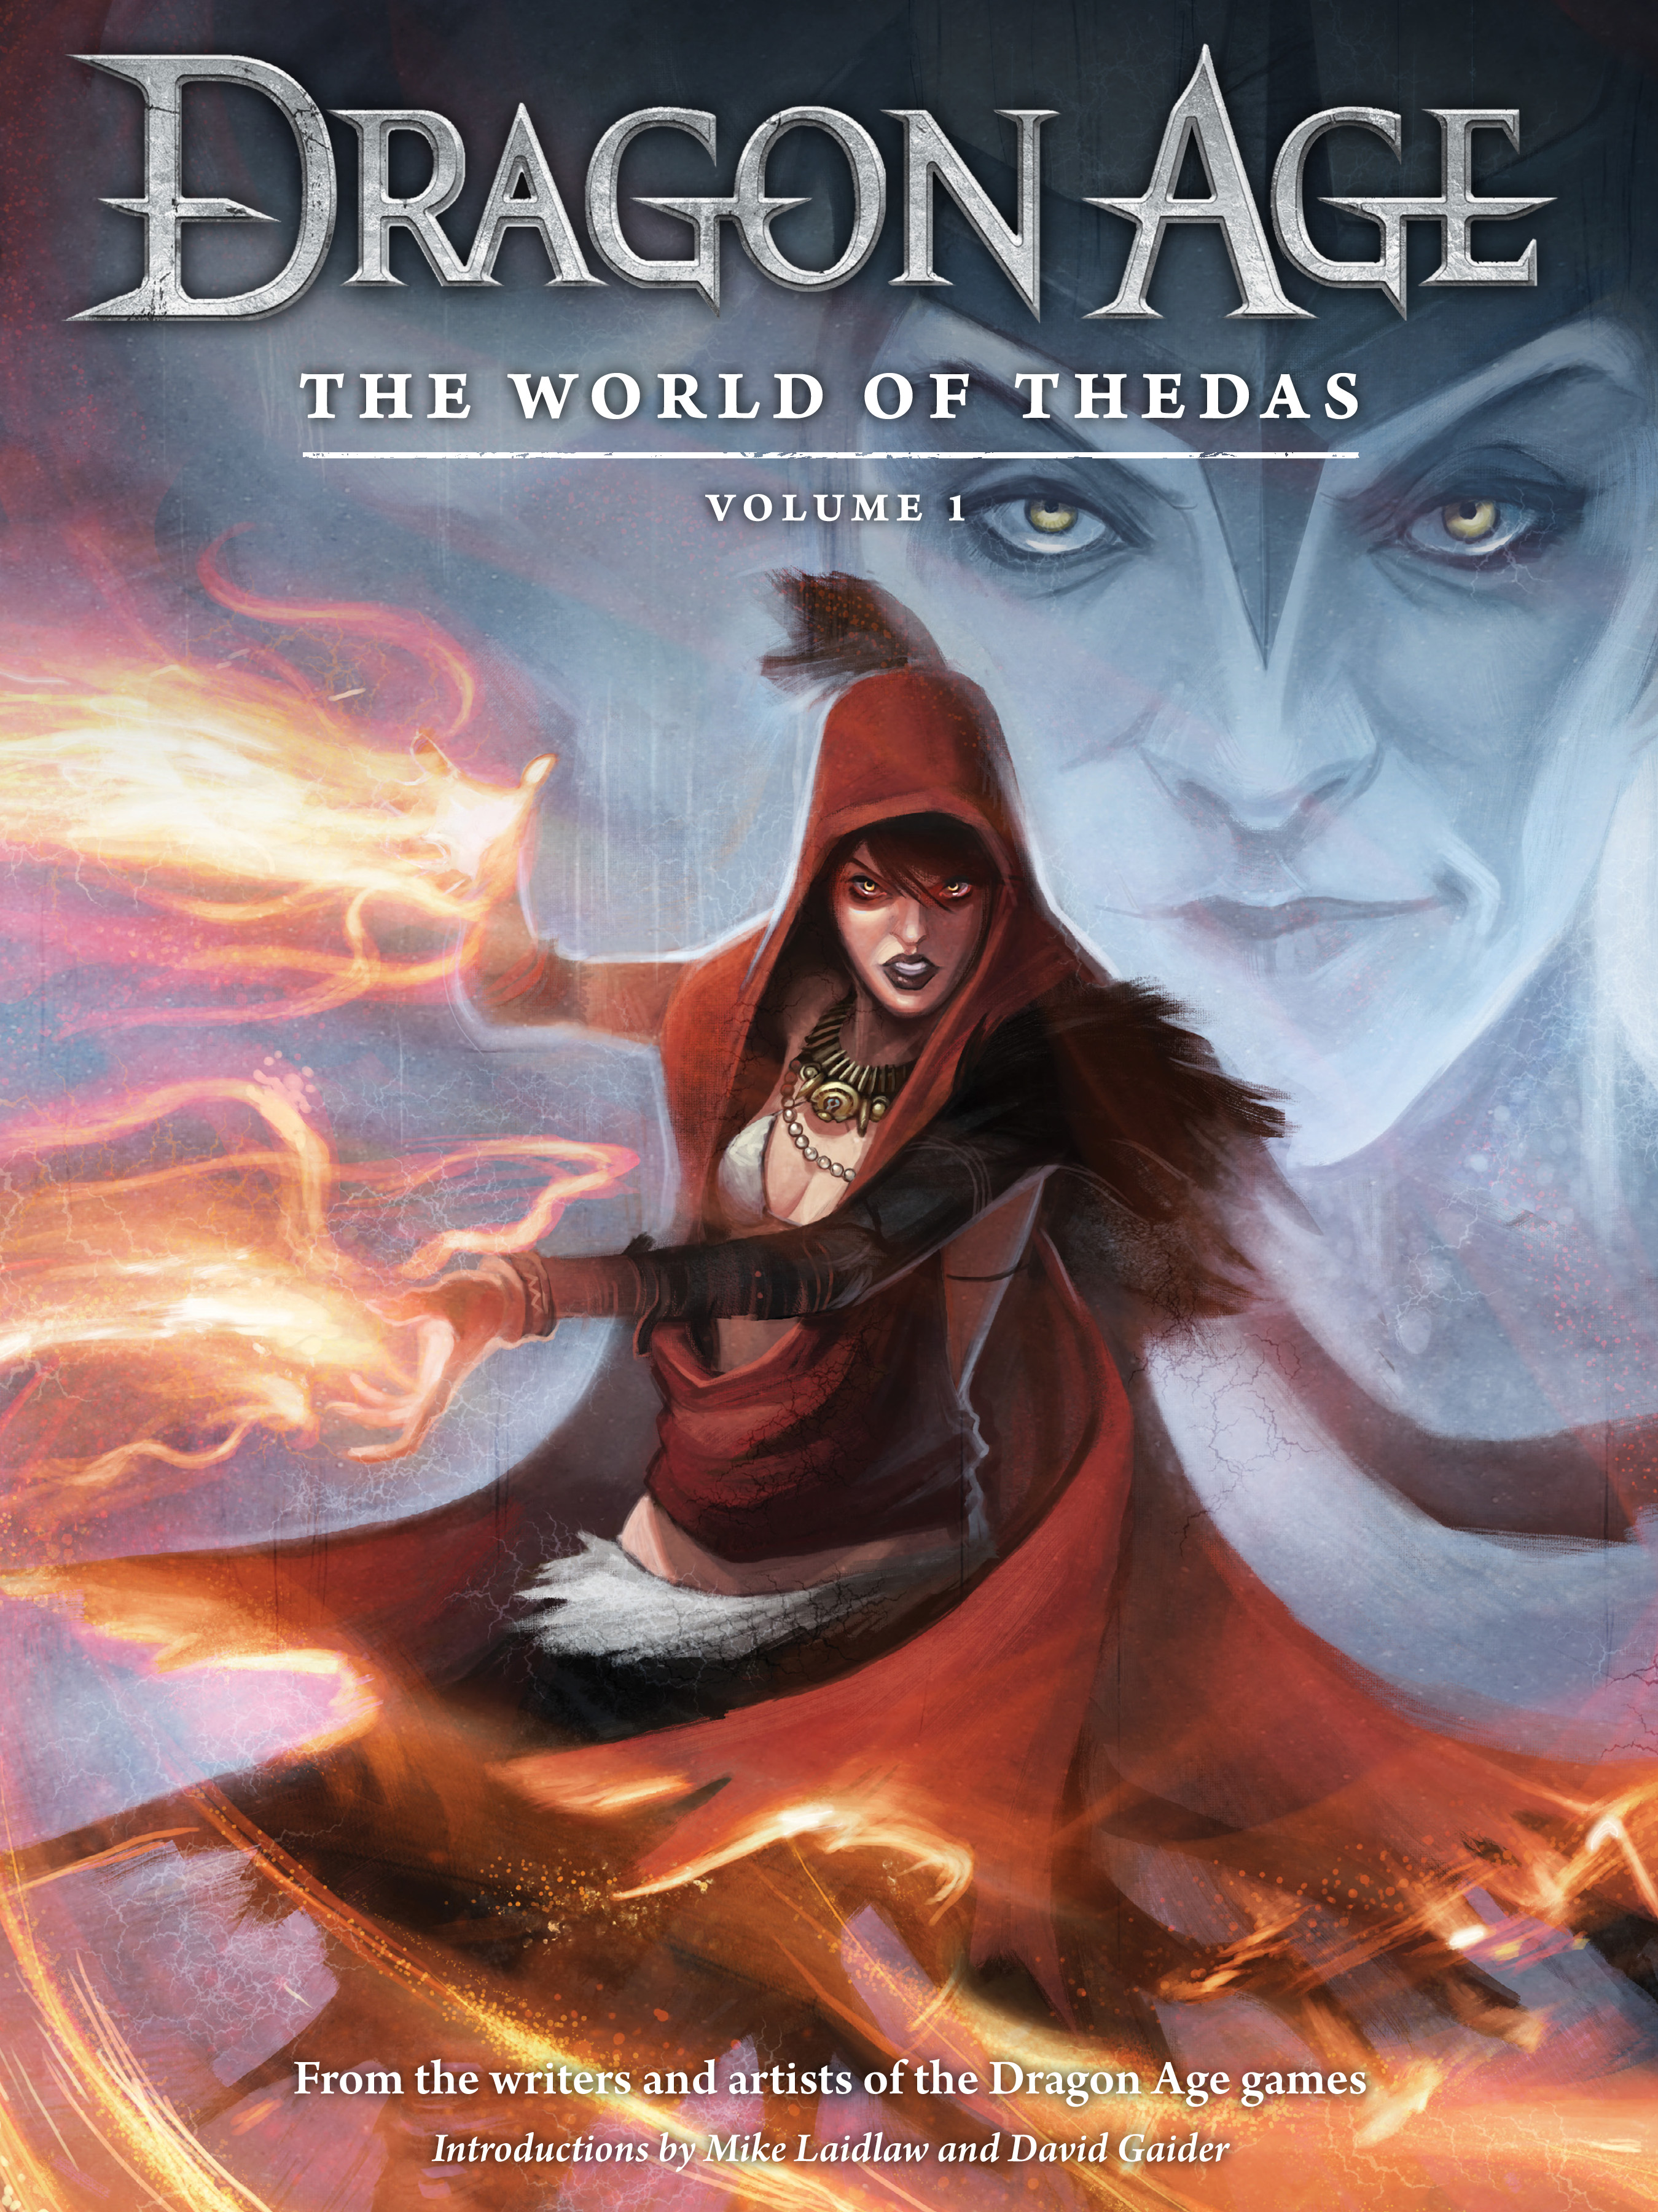 Read online Dragon Age: The World of Thedas comic -  Issue # TPB 1 - 1